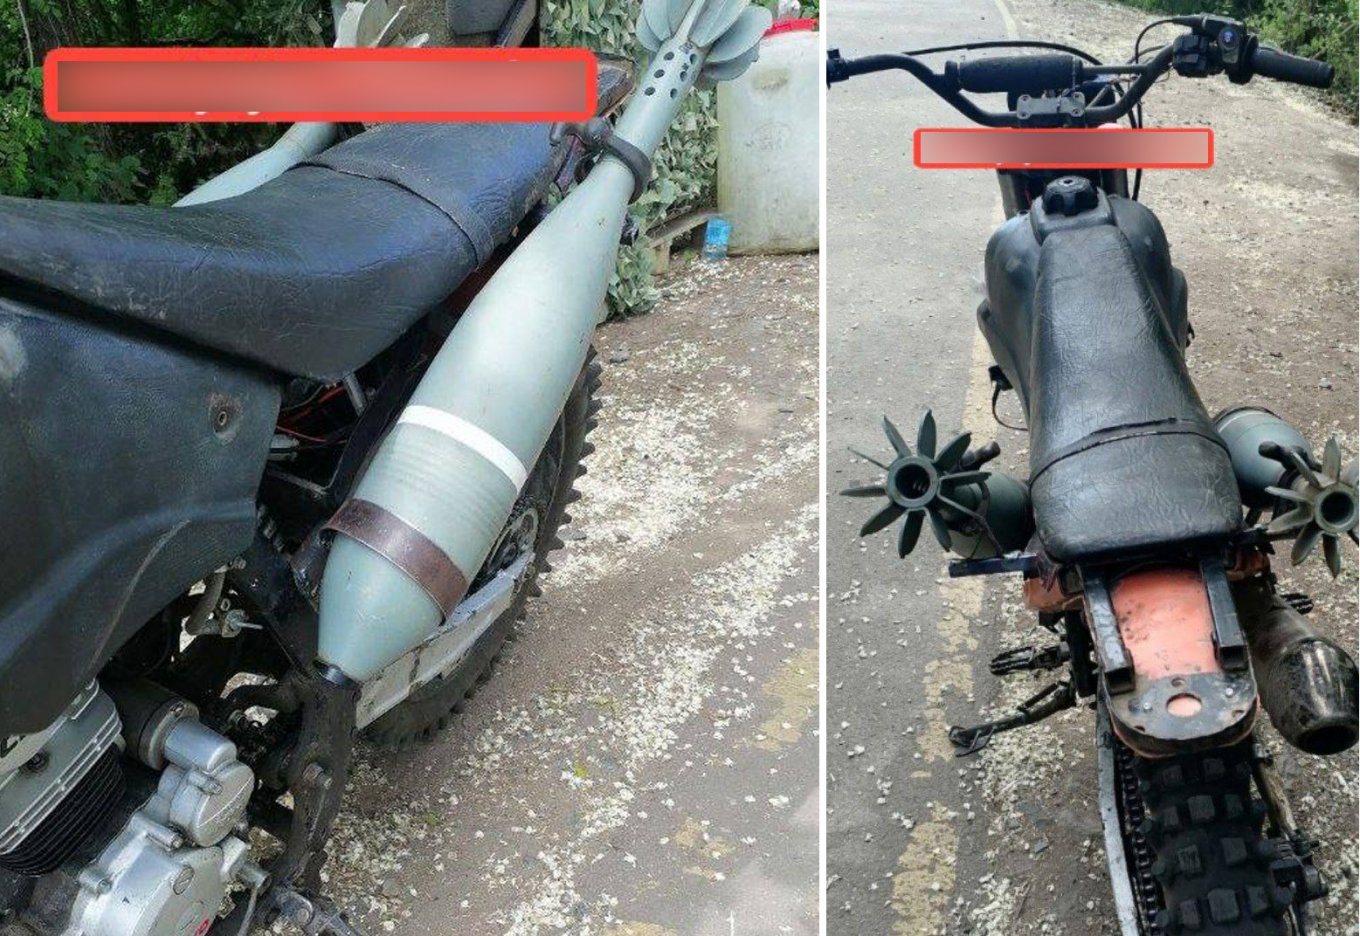 Motorcycle with mortar shells / Defense Express / First Motorbike With a Cope Cage Destroyed, But in the End, it Worked Out